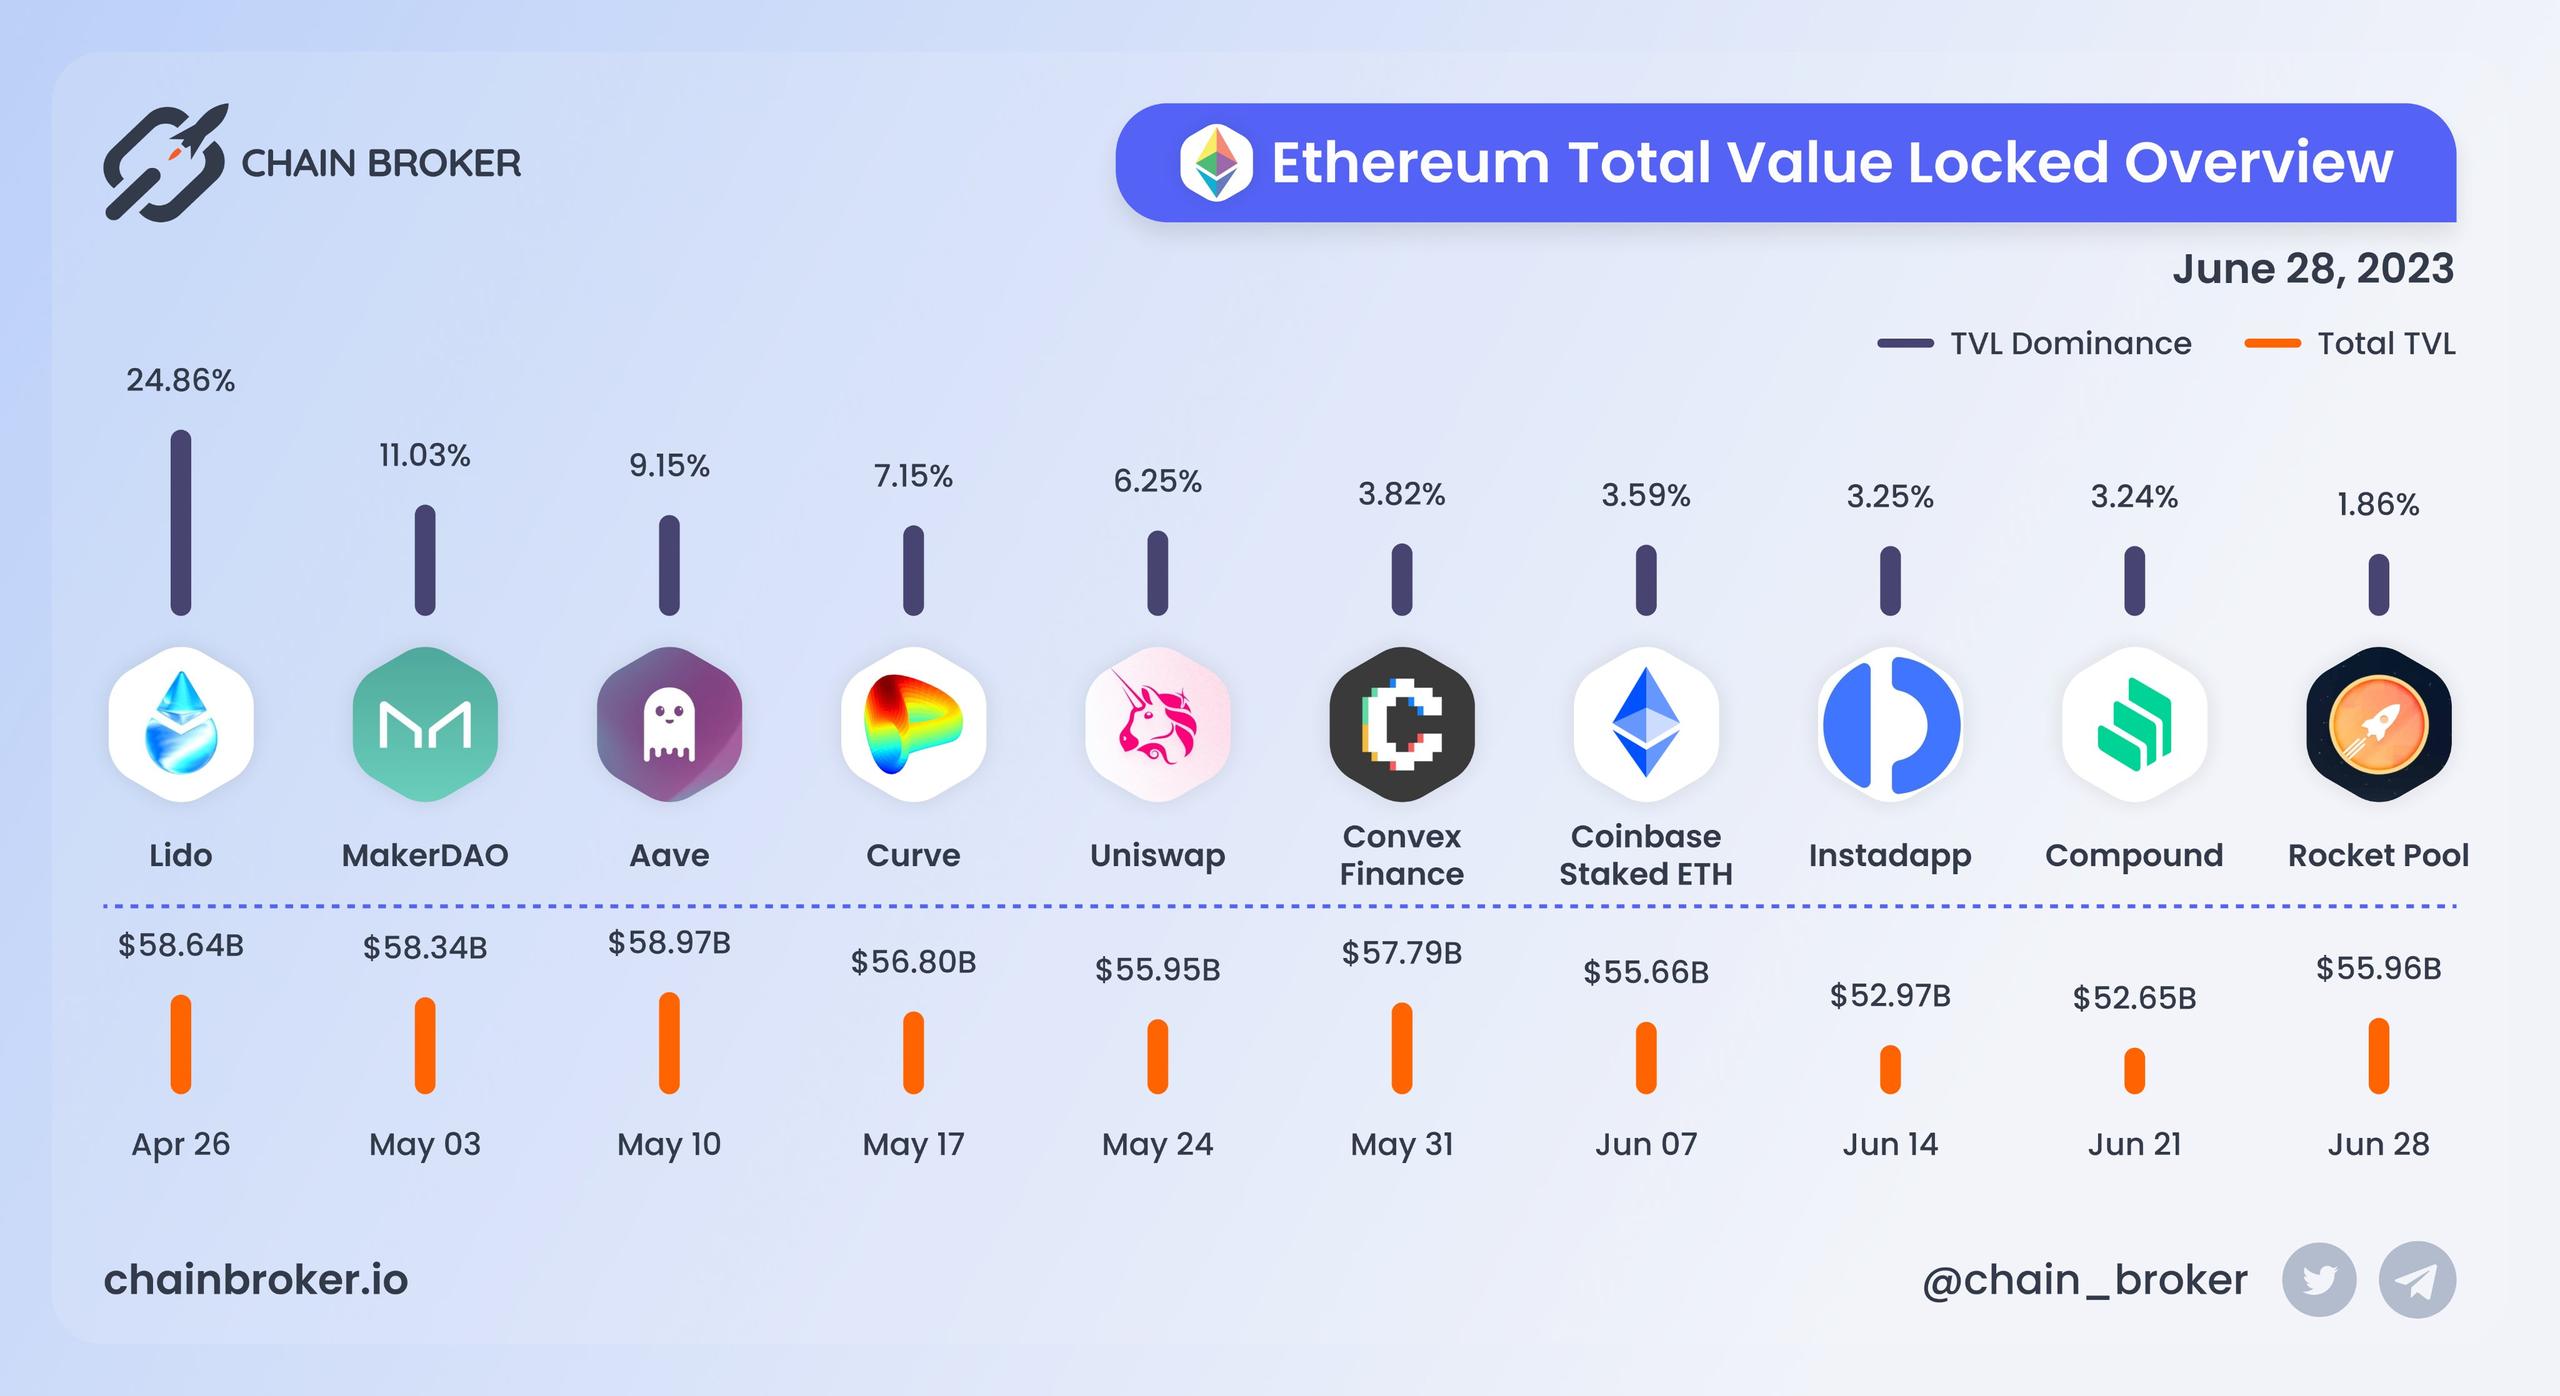 Ethereum total value locked overview